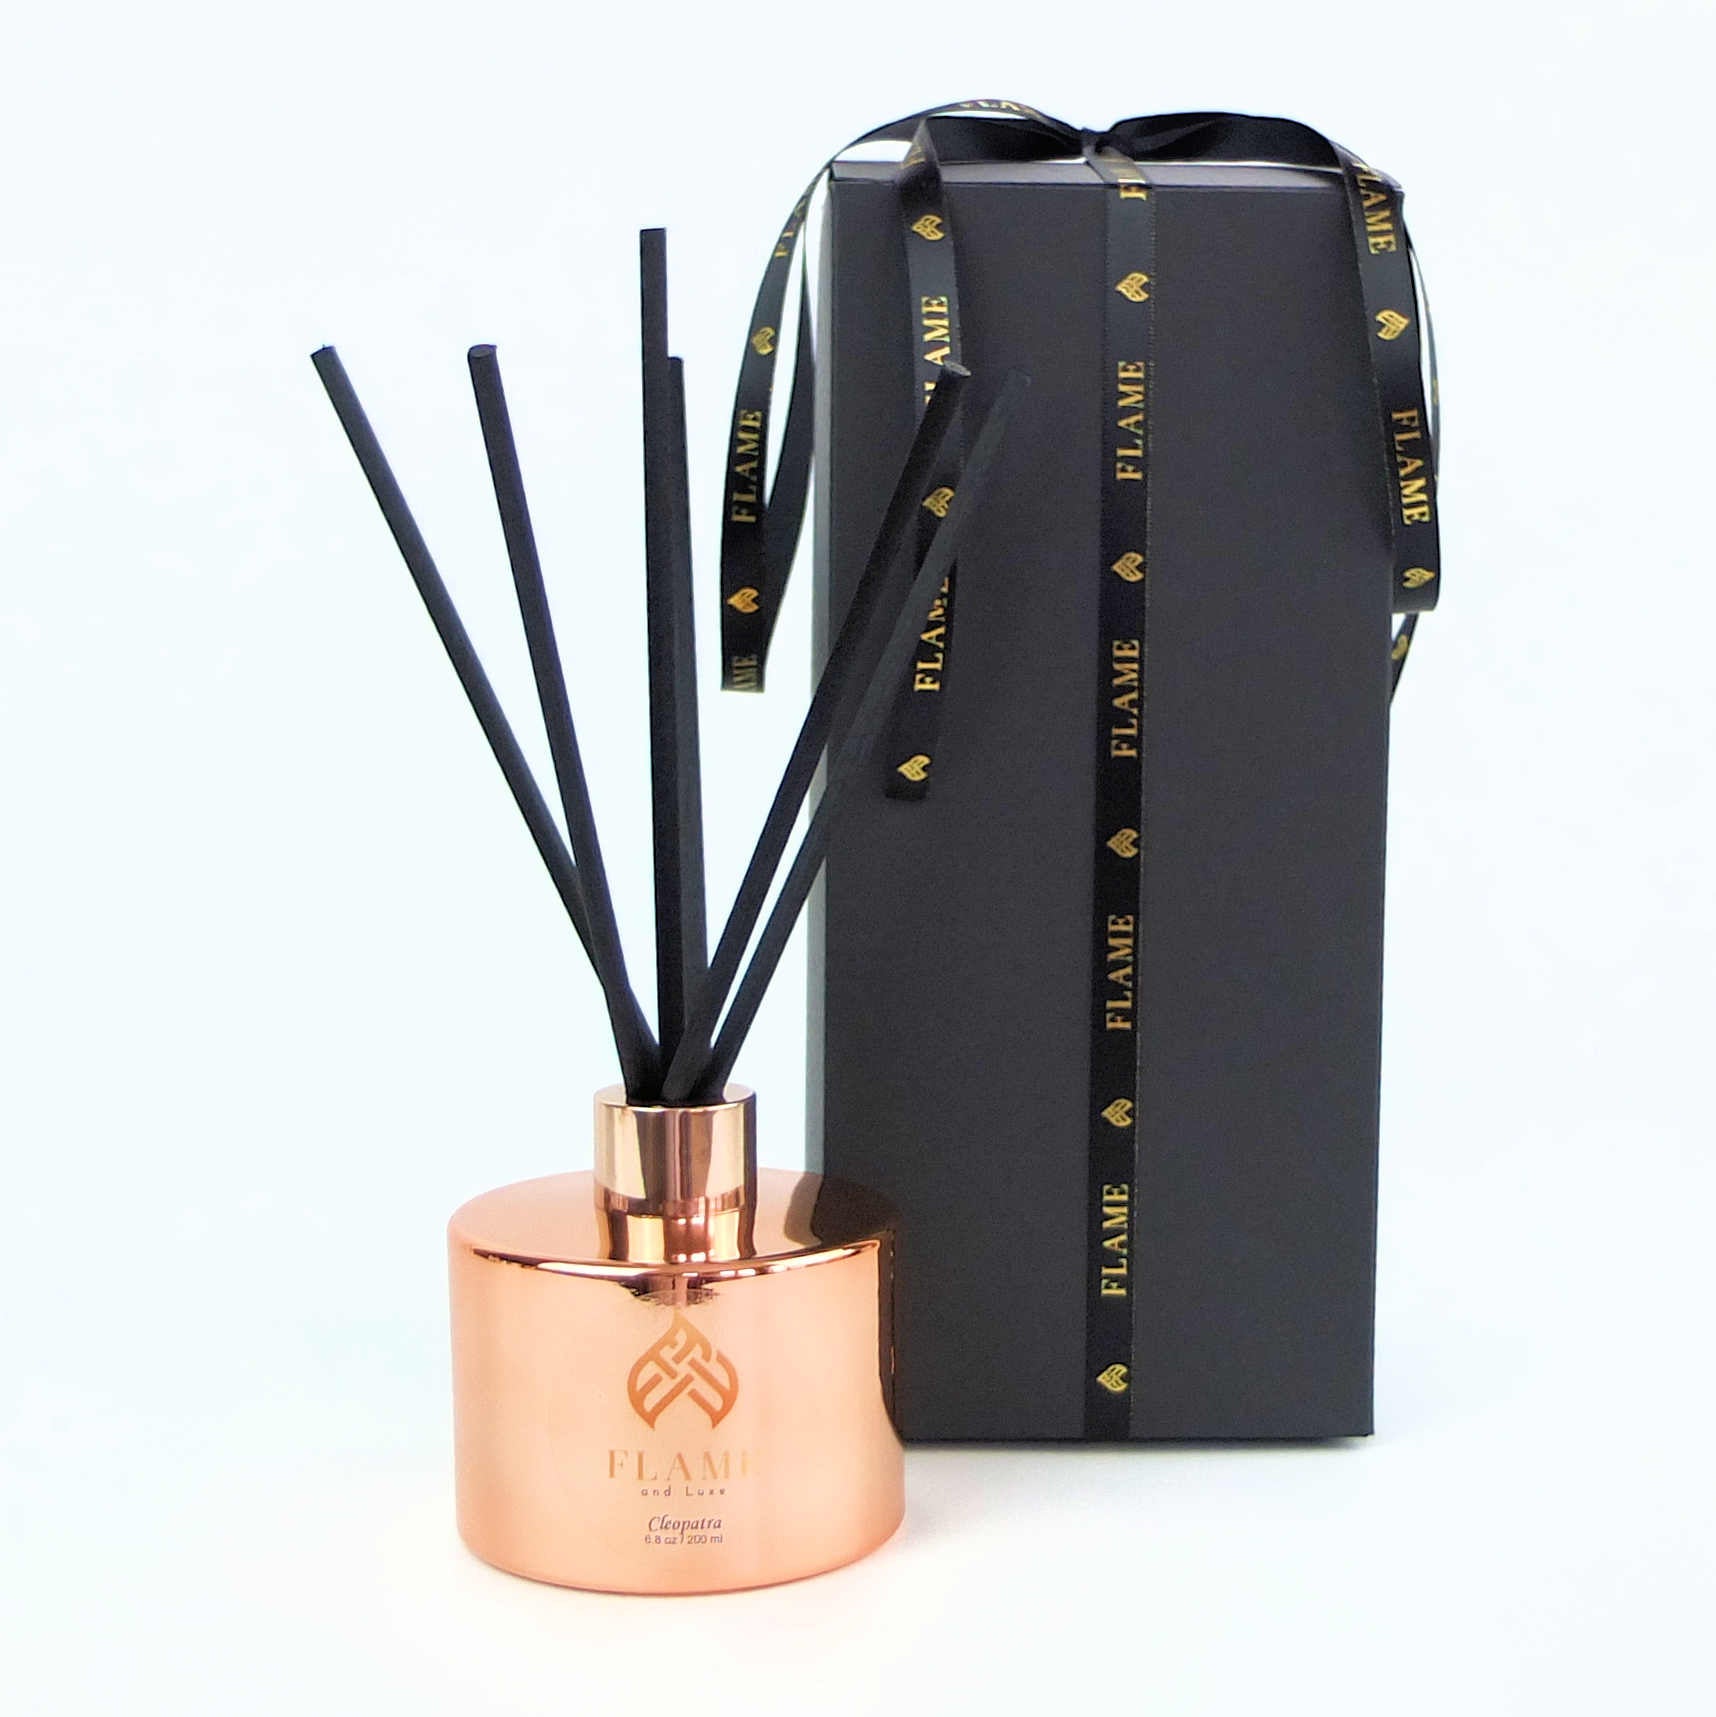 ESSENZA rose gold reed diffuser